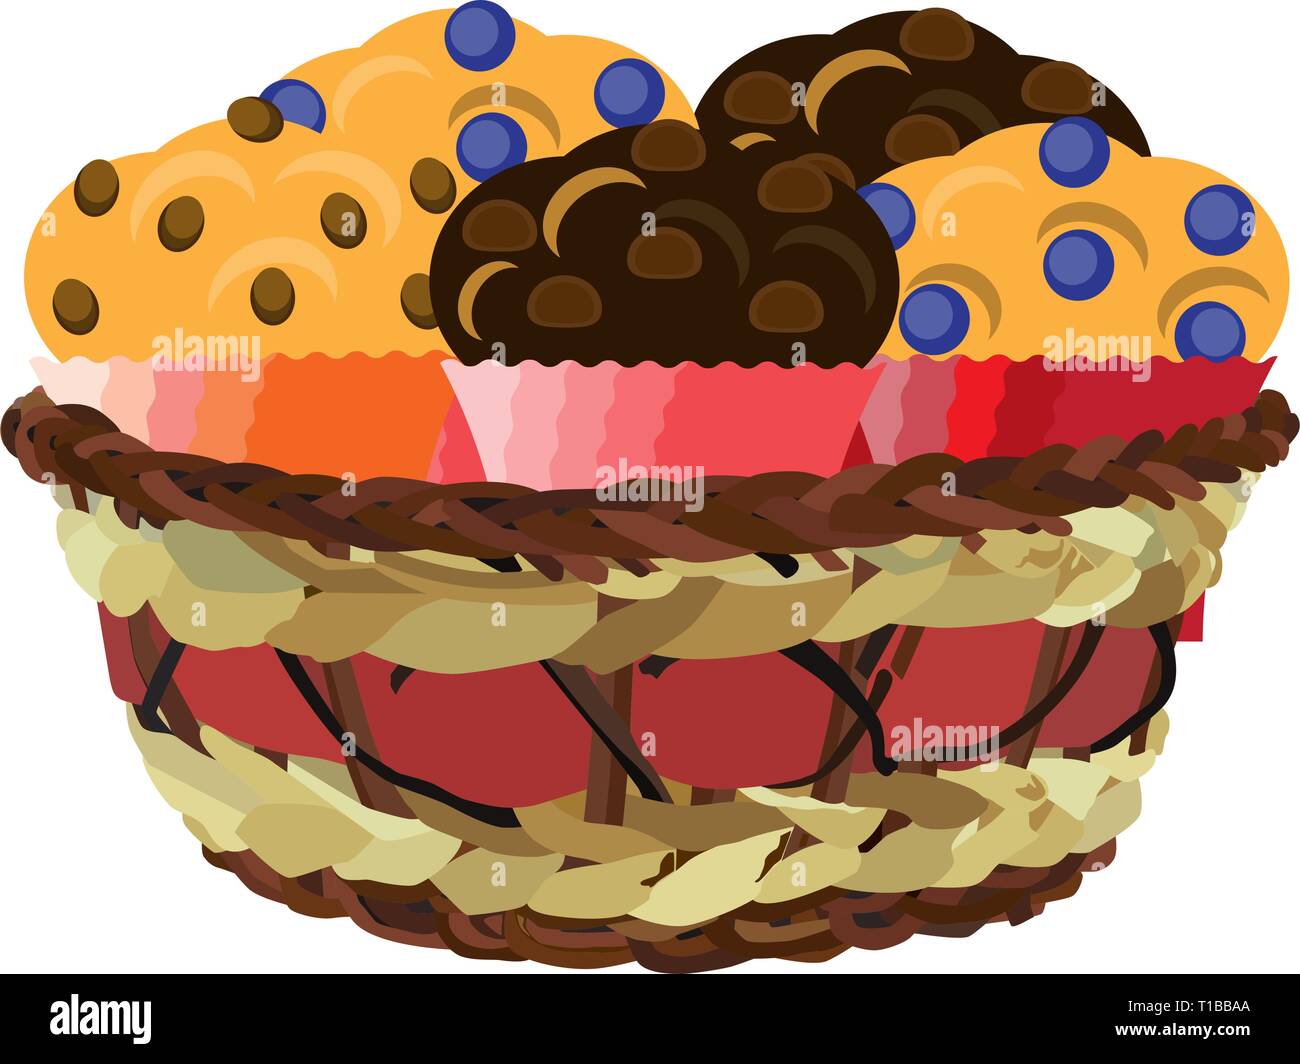 Wicker basket with muffins, vector flat illustration Stock Vector